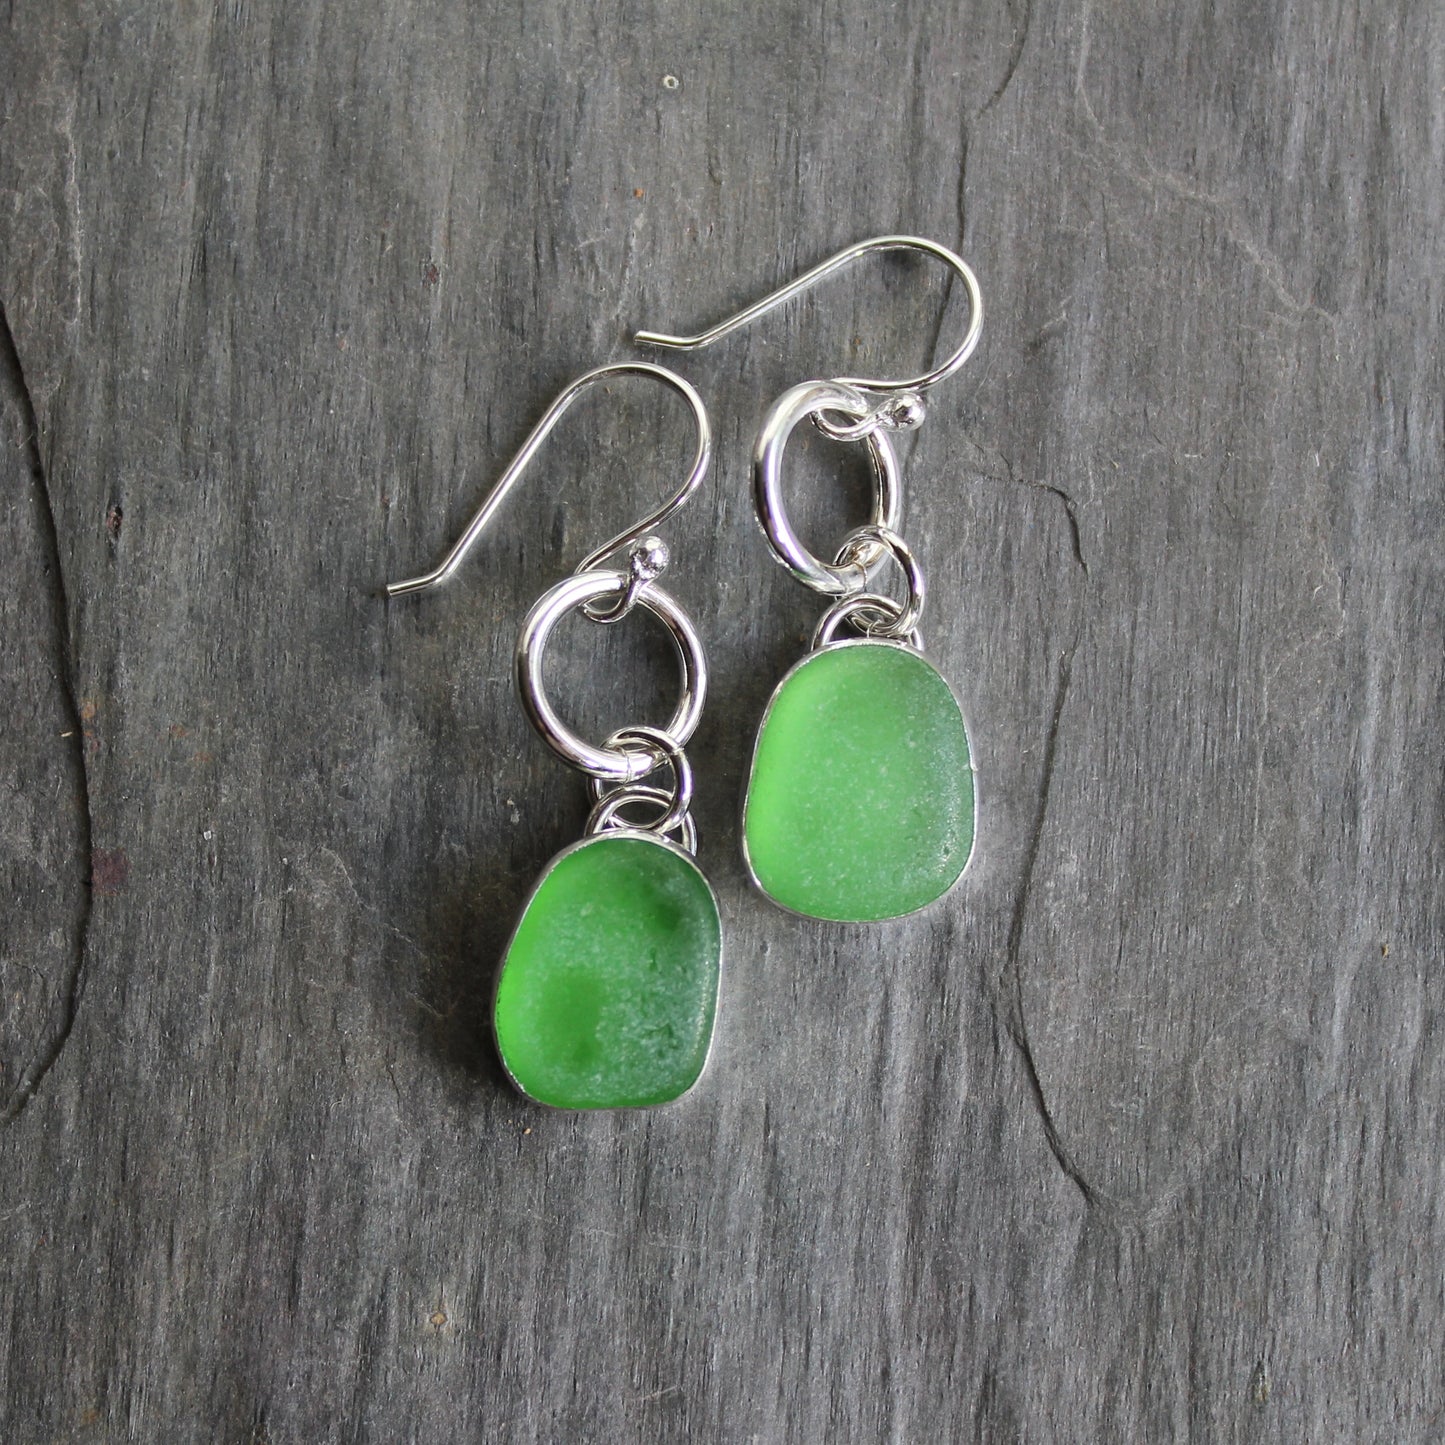 This is a pair of dangly bright green sea glass earrings with approximately 1/2" sea glass set in fine and sterling silver bezel settings and attached to a ring & ear wires. Accent Yourself specializes in sterling silver jewelry handmade by Barb Macy and Will Macy in Corvallis, OR including sea glass jewelry, Oregon sunstones, sterling silver earrings, and jewelry made with gemstones found in the Pacific Northwest.